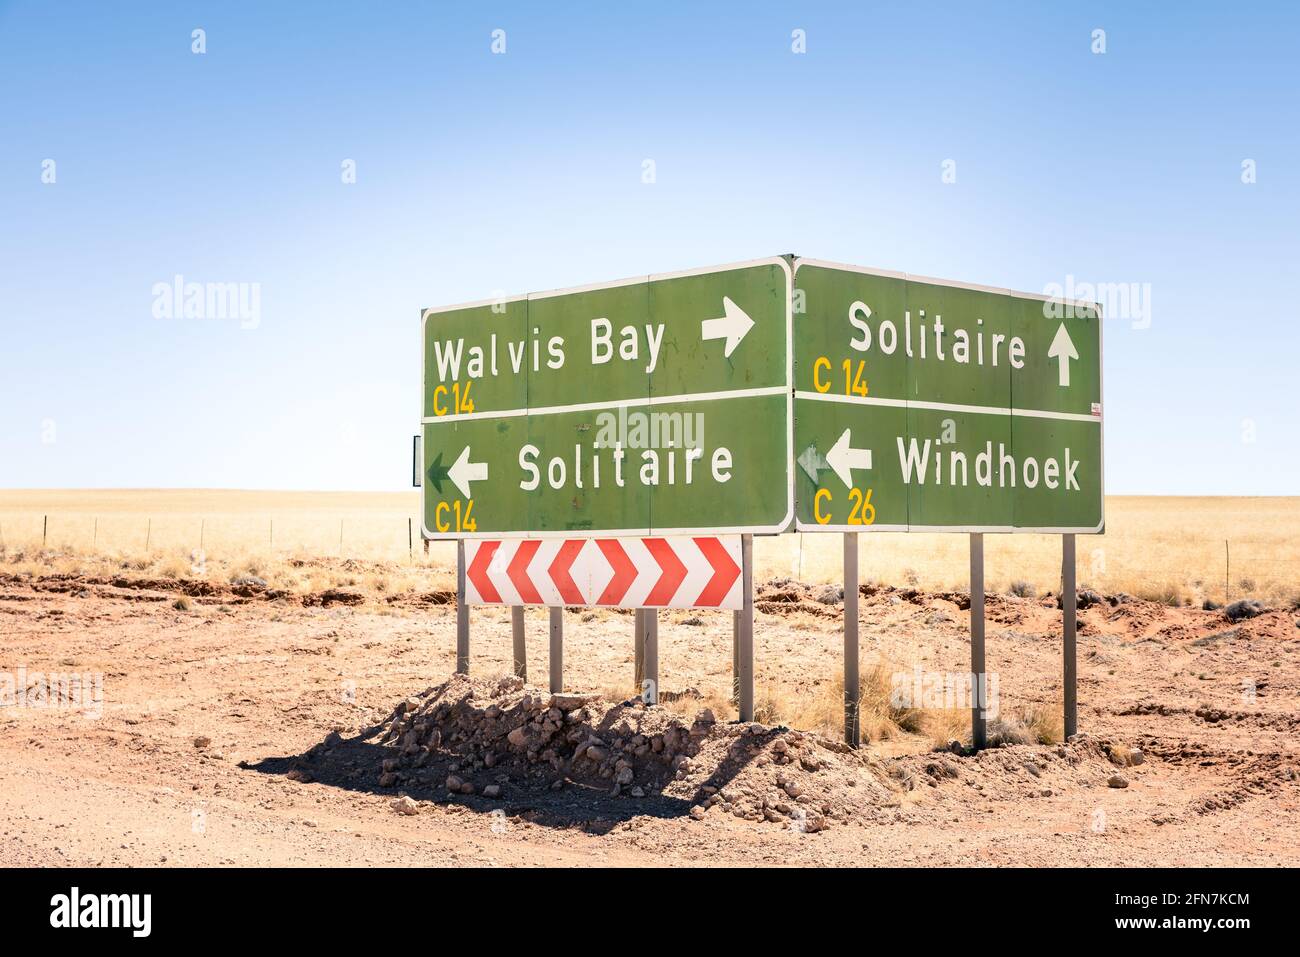 Multiple road sign in Namibia - Walvis Bay - Solitaire - Windhoek - Desert streets to exclusive travel destinations Stock Photo